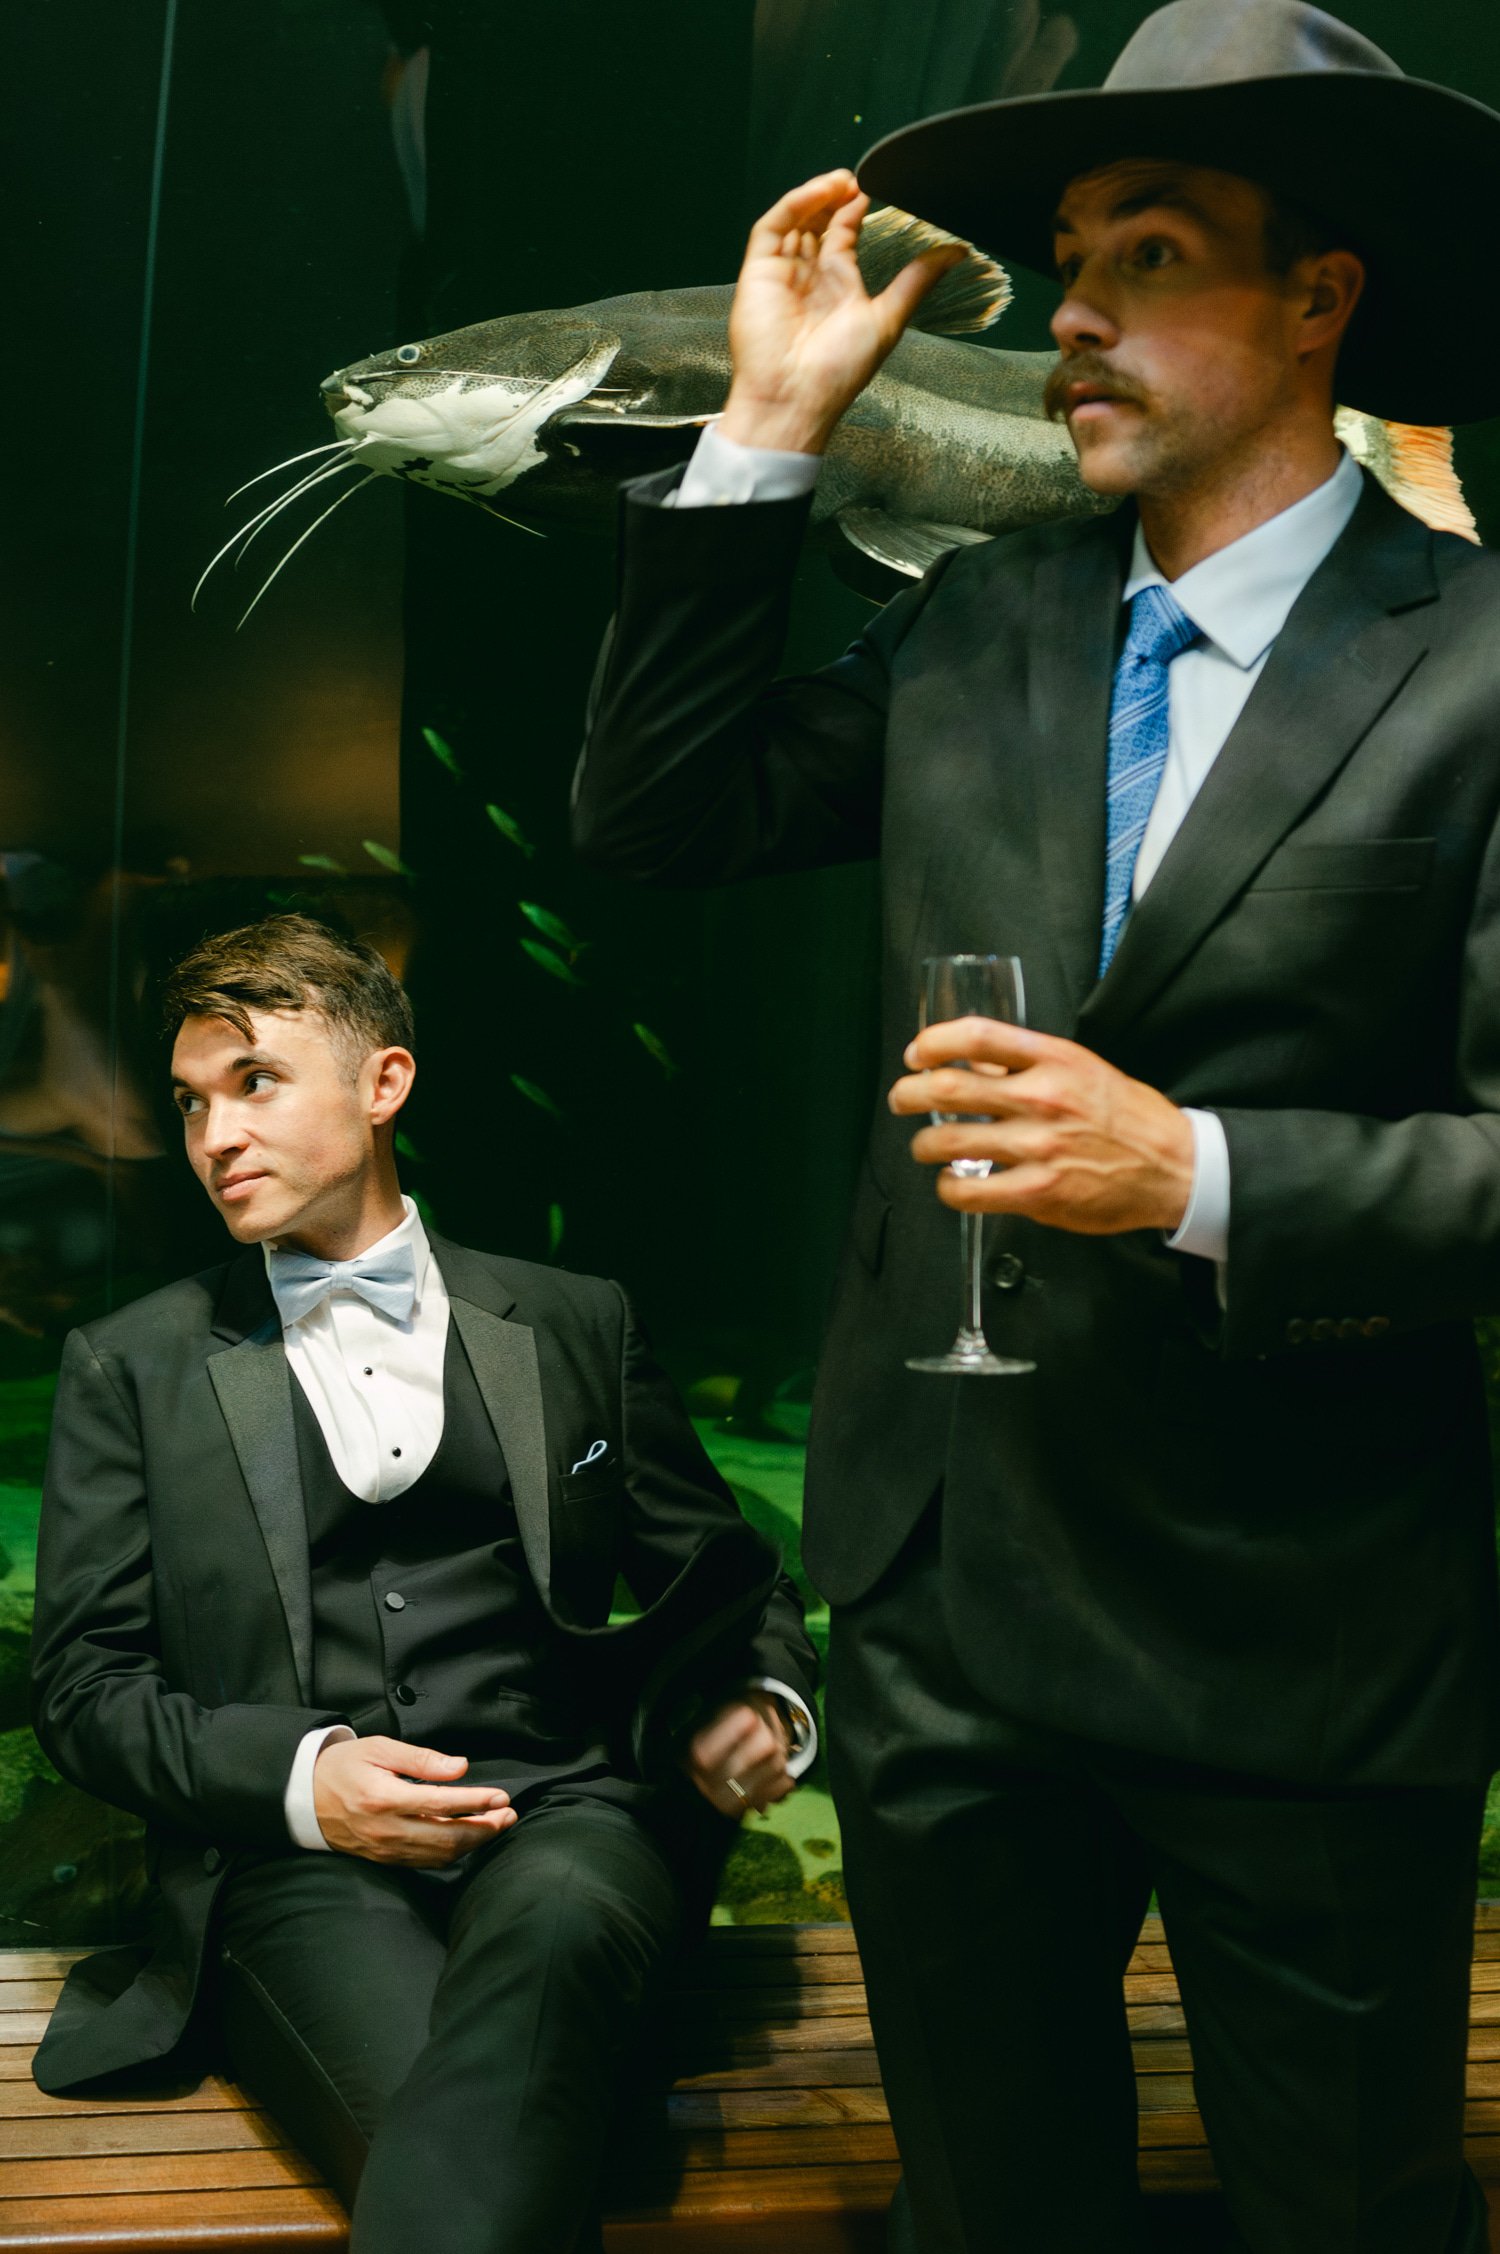 California academy of Sciences in San Francisco Wedding, photo of the groom and a guest with a drink in his hand during the cocktail hour